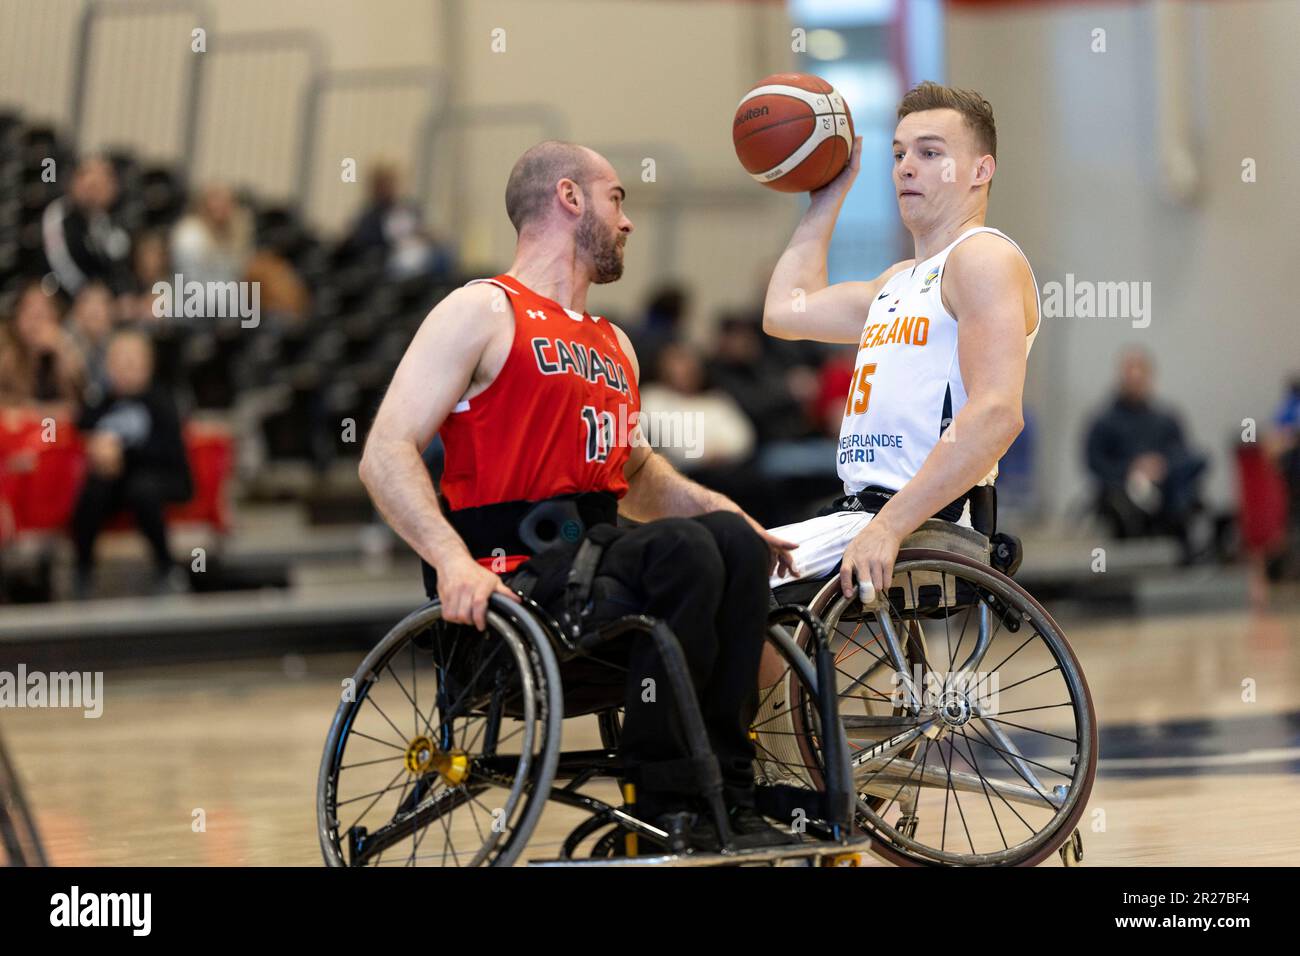 Ottawa, Canada. 17 May 2023. Lee Melymick (10) of the Canada Men's wheelchair basketball team and Quinetn Zantinge (15) of the Netherlands Men's wheelchair basketball team in men’s wheelchair basketball action in the Canada development squad versus the Netherlands national team in the Ottawa Invitational Tournament at Carleton University. Copyright 2023 Sean Burges / Mundo Sport Images / Alamo Live News. Stock Photo